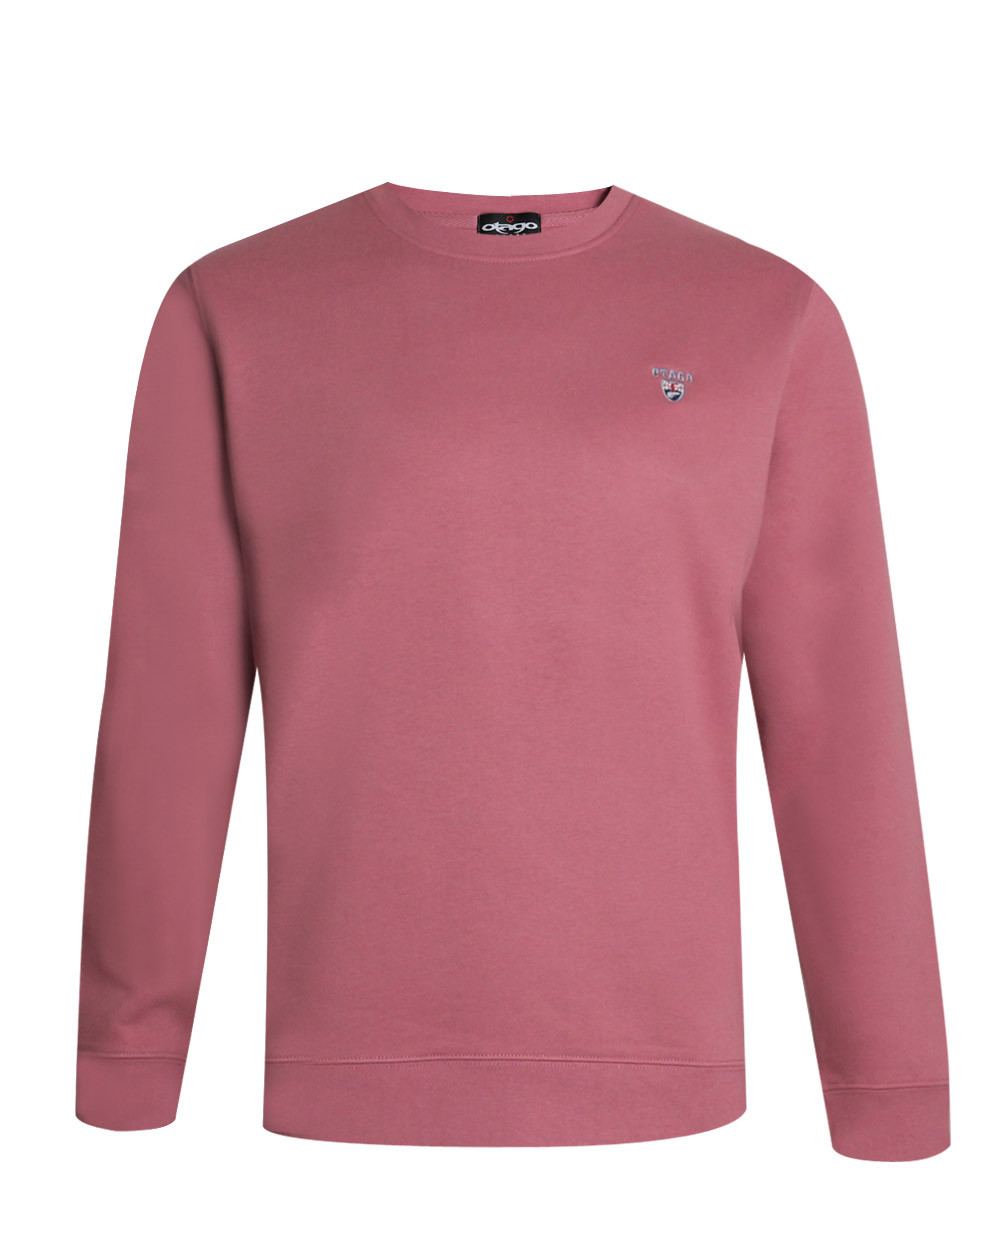 Sweat col rond Printago Otago rugby antique rose pour Homme